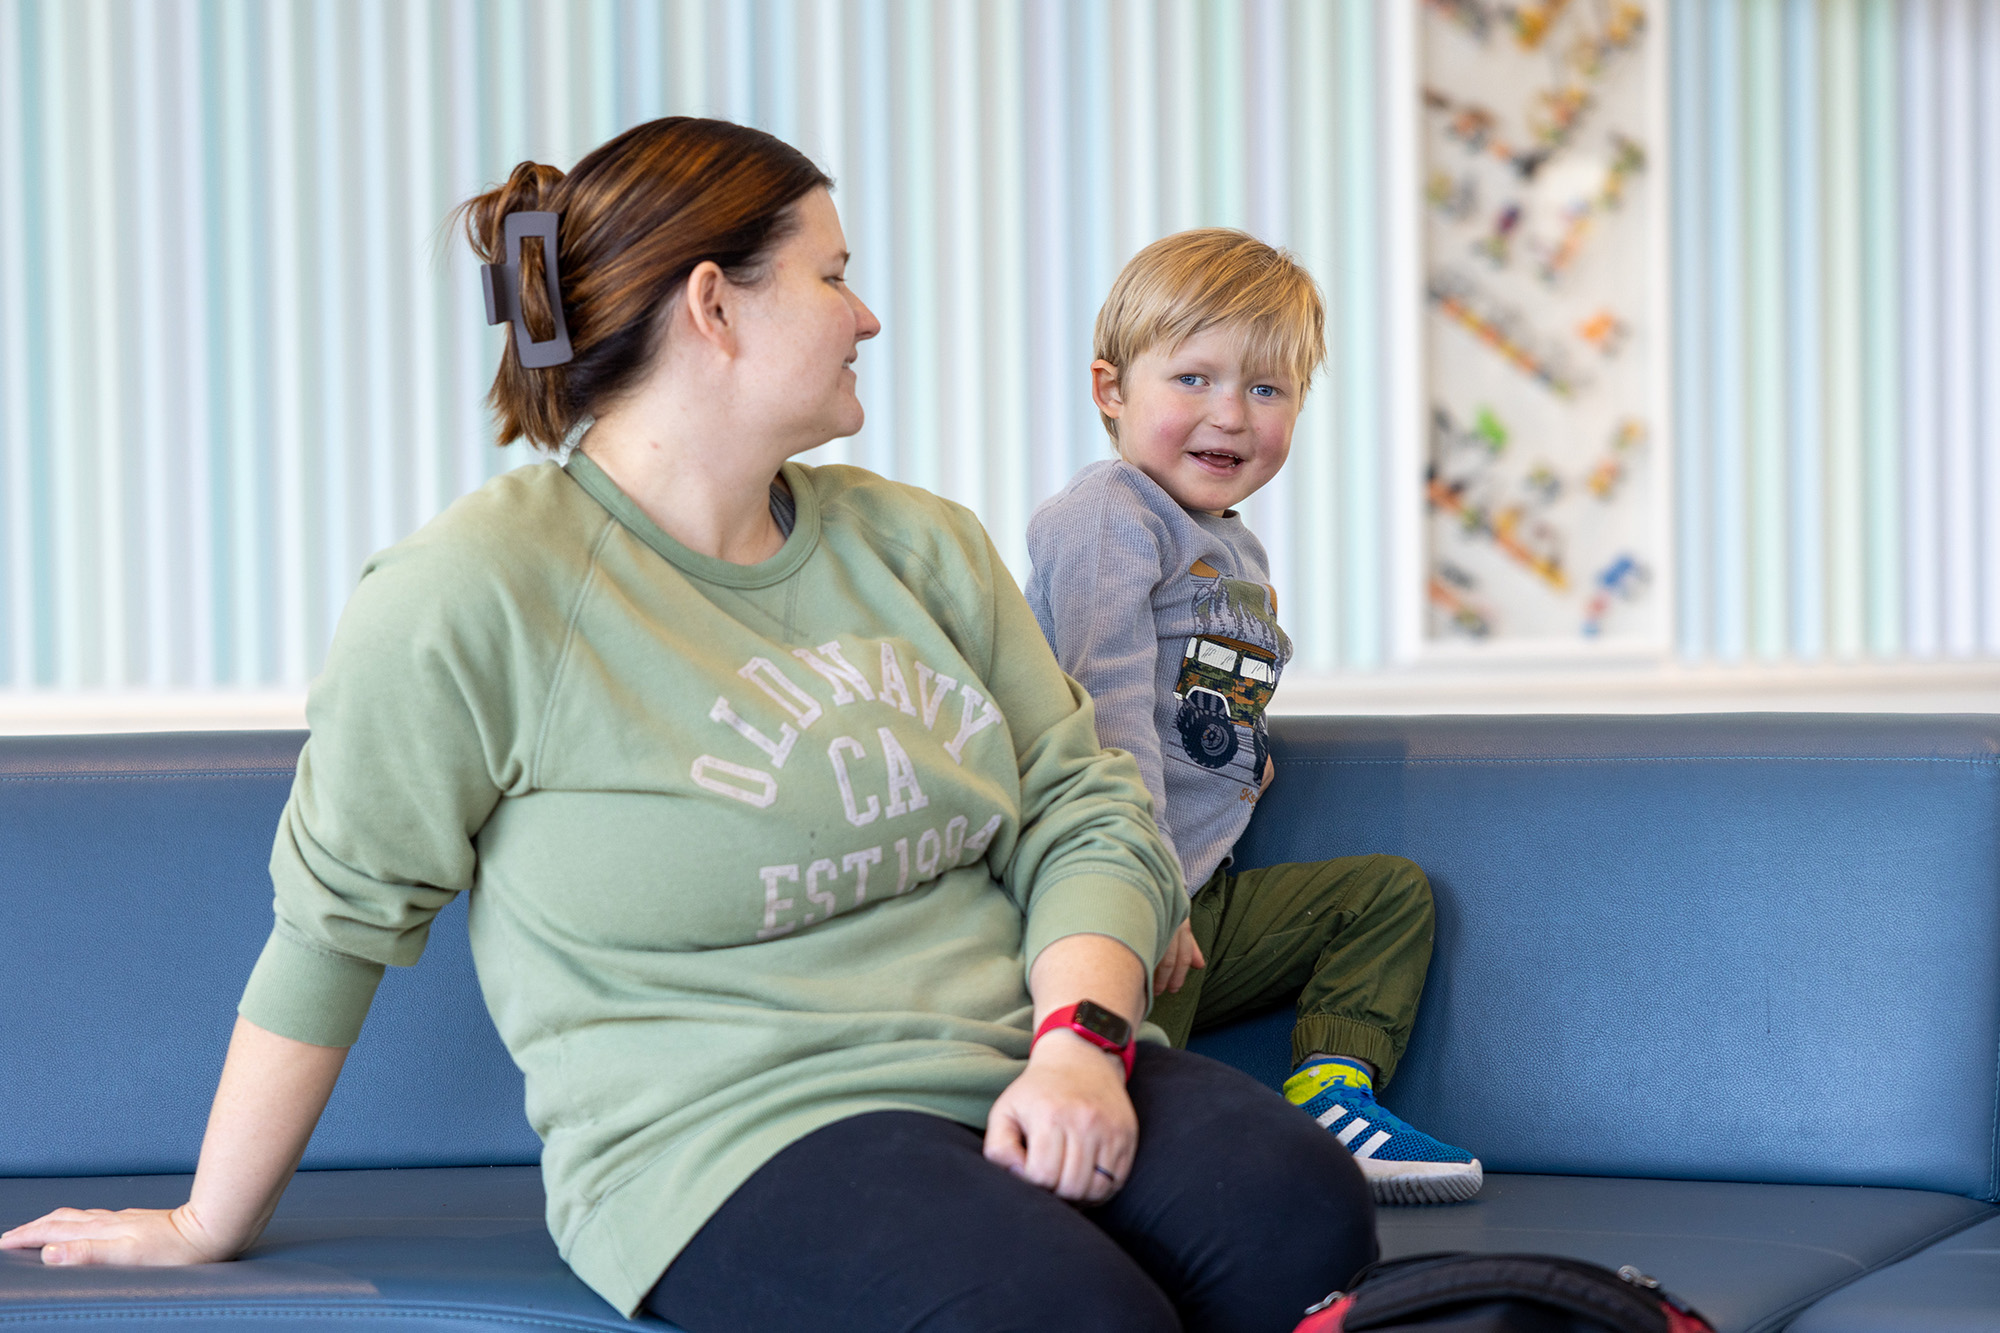 University of Iowa Stead Family Children's Hospital patient plays with his mother